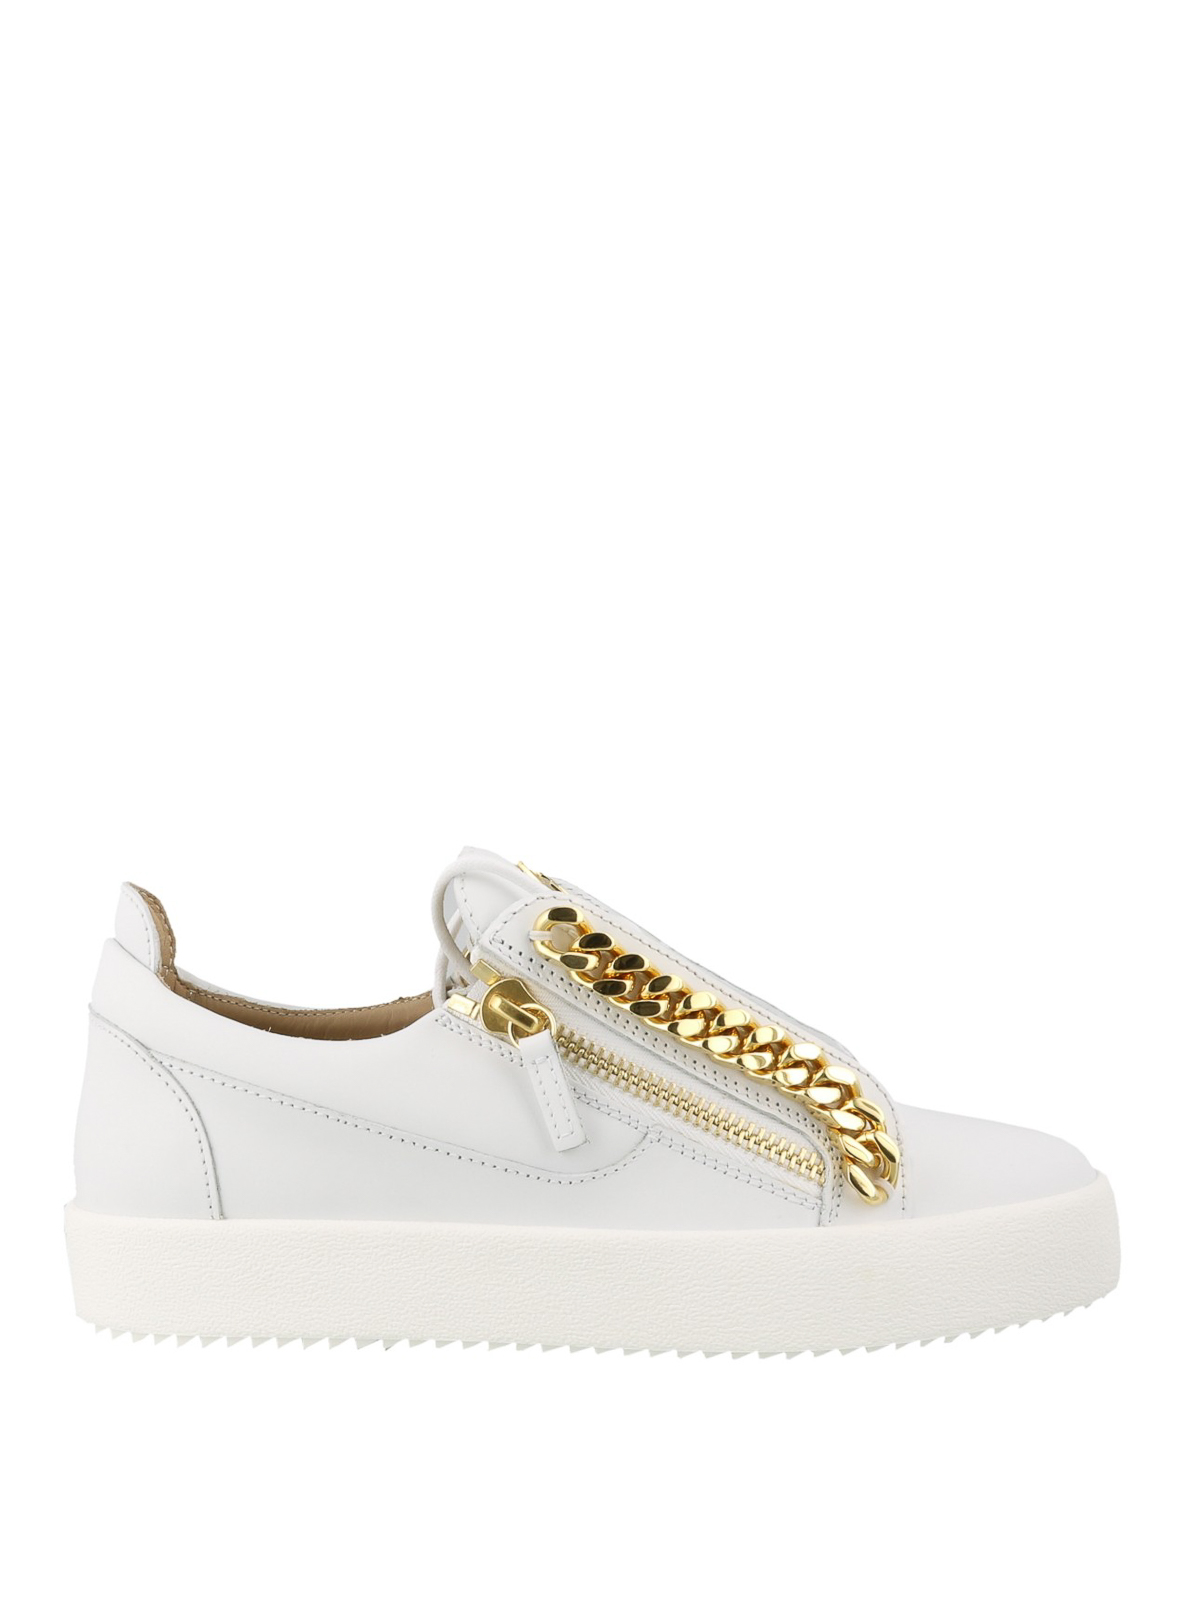 Trainers Giuseppe Zanotti - Frankie white leather sneakers - RM90079001